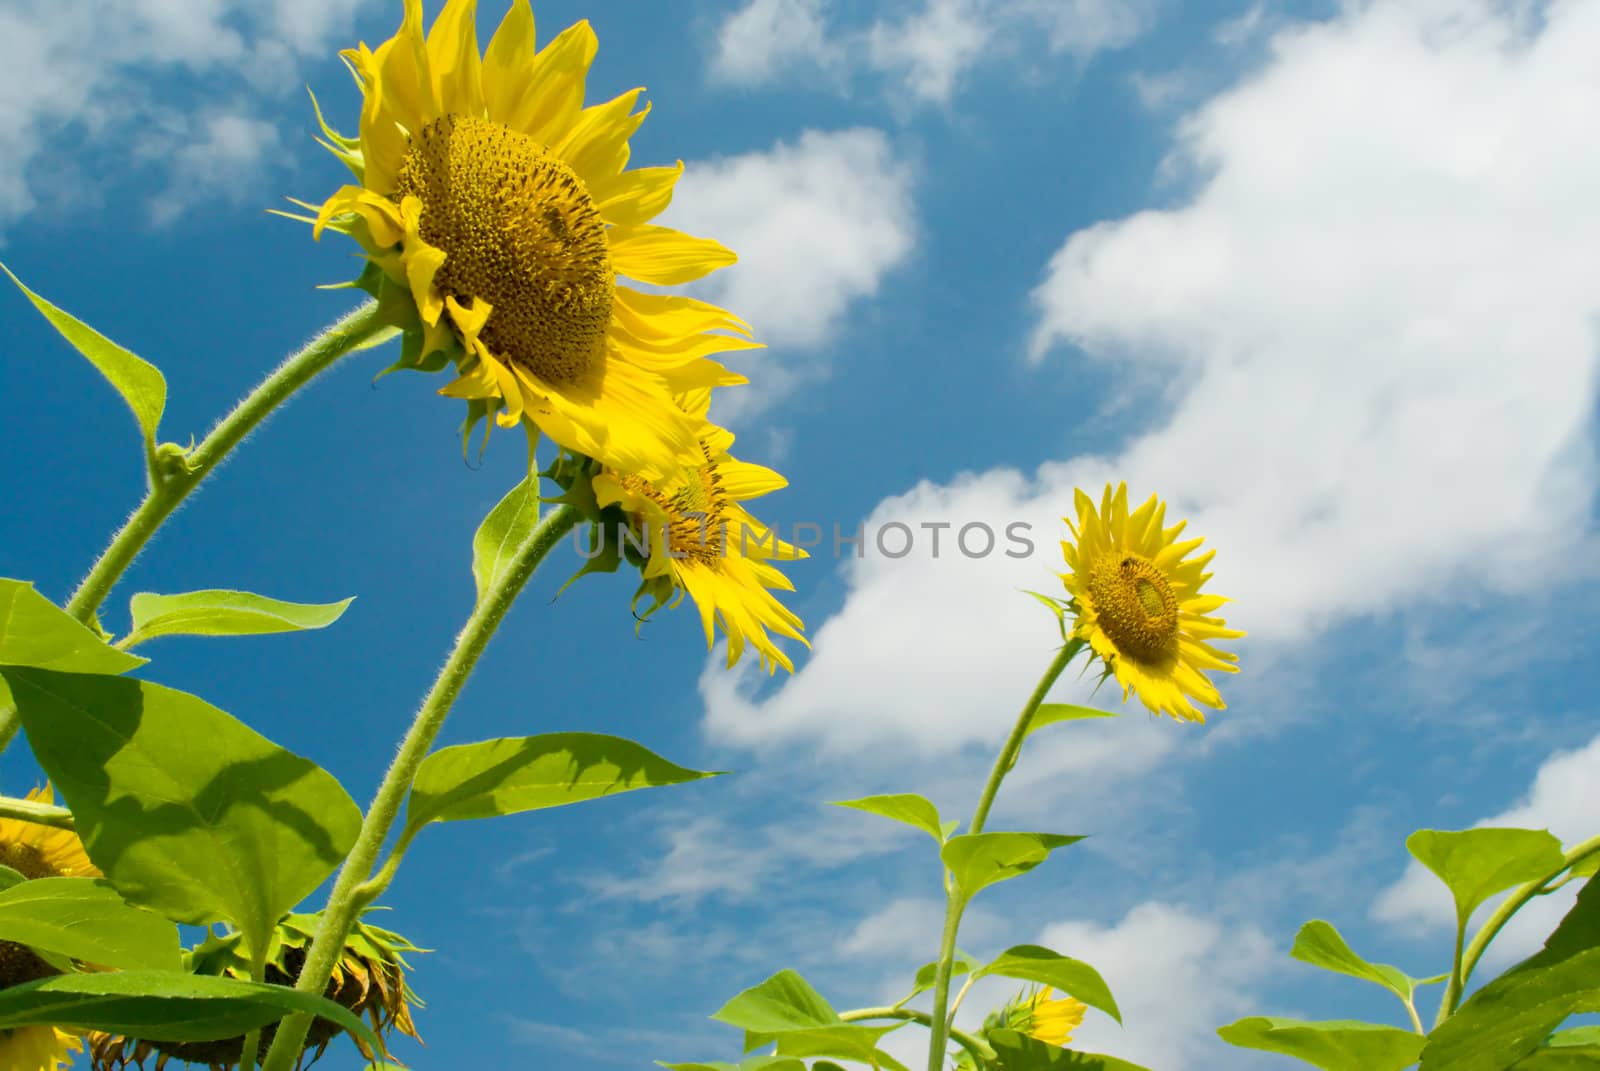 Three sunflowers against the sky with clouds